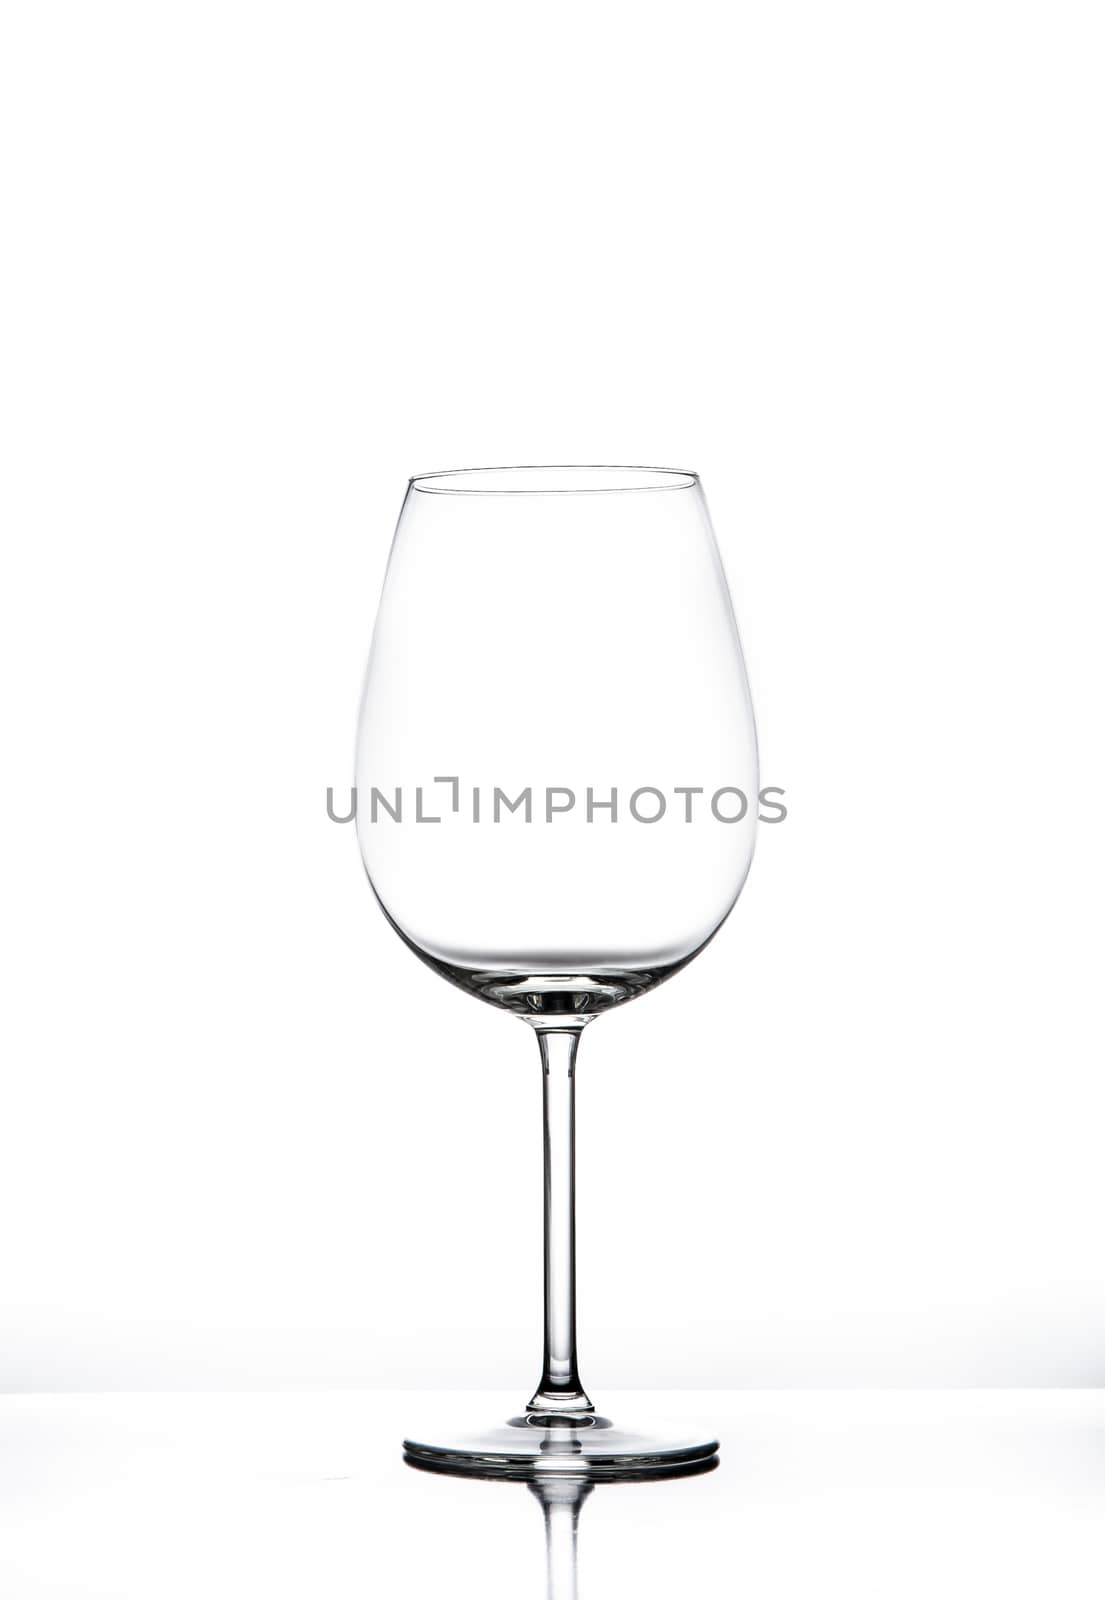 Empty wine glass isolated on white seamless background